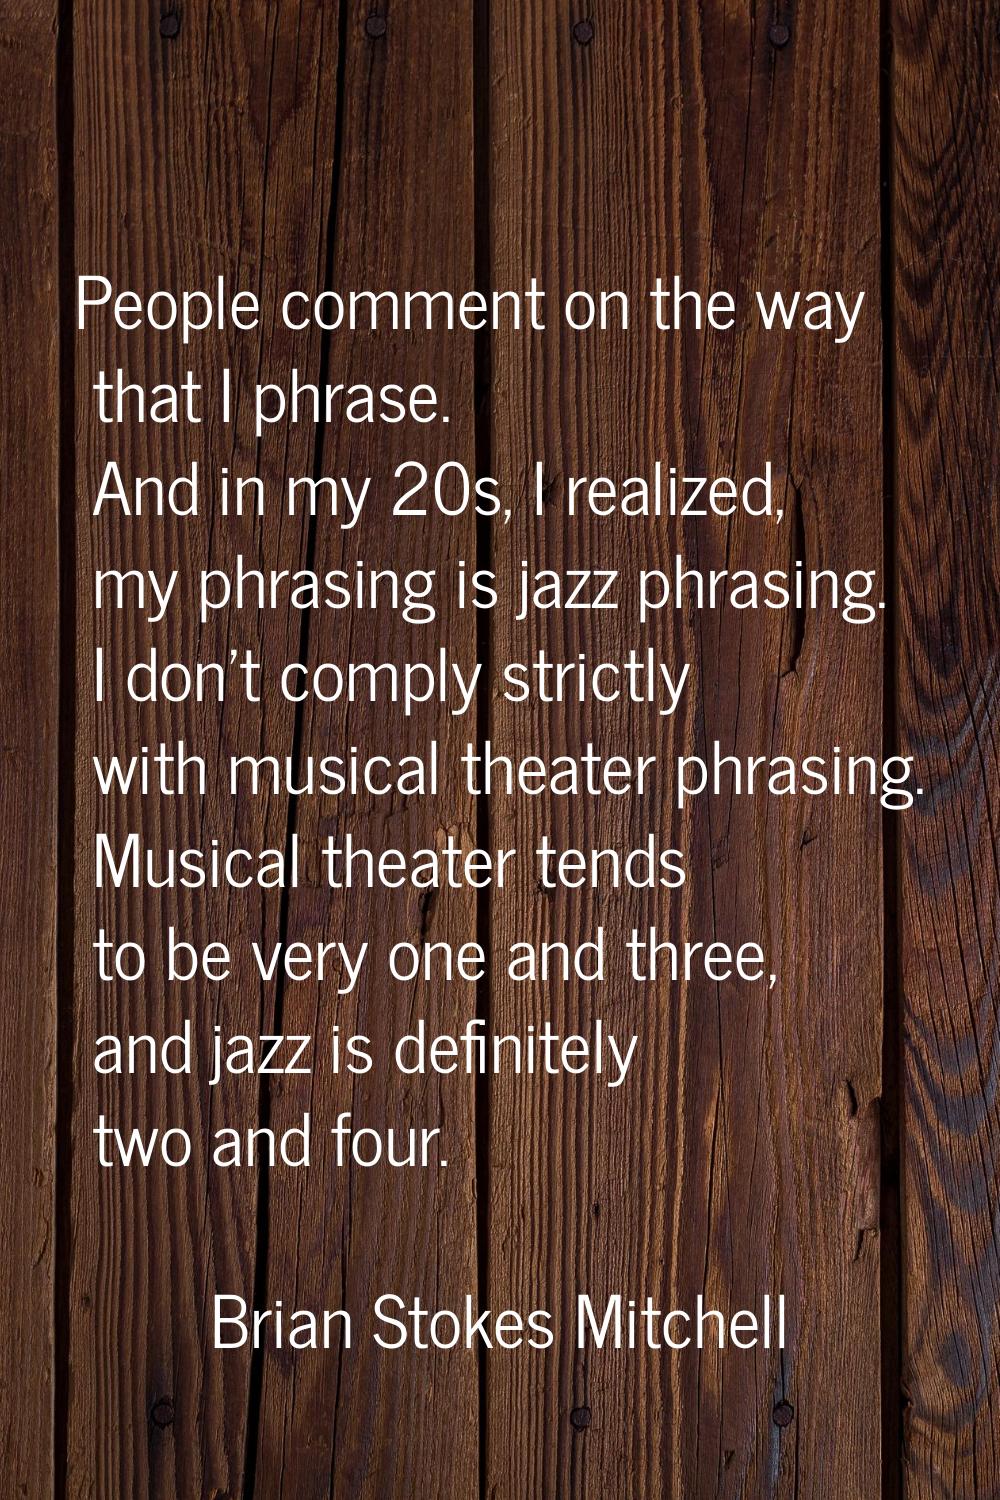 People comment on the way that I phrase. And in my 20s, I realized, my phrasing is jazz phrasing. I